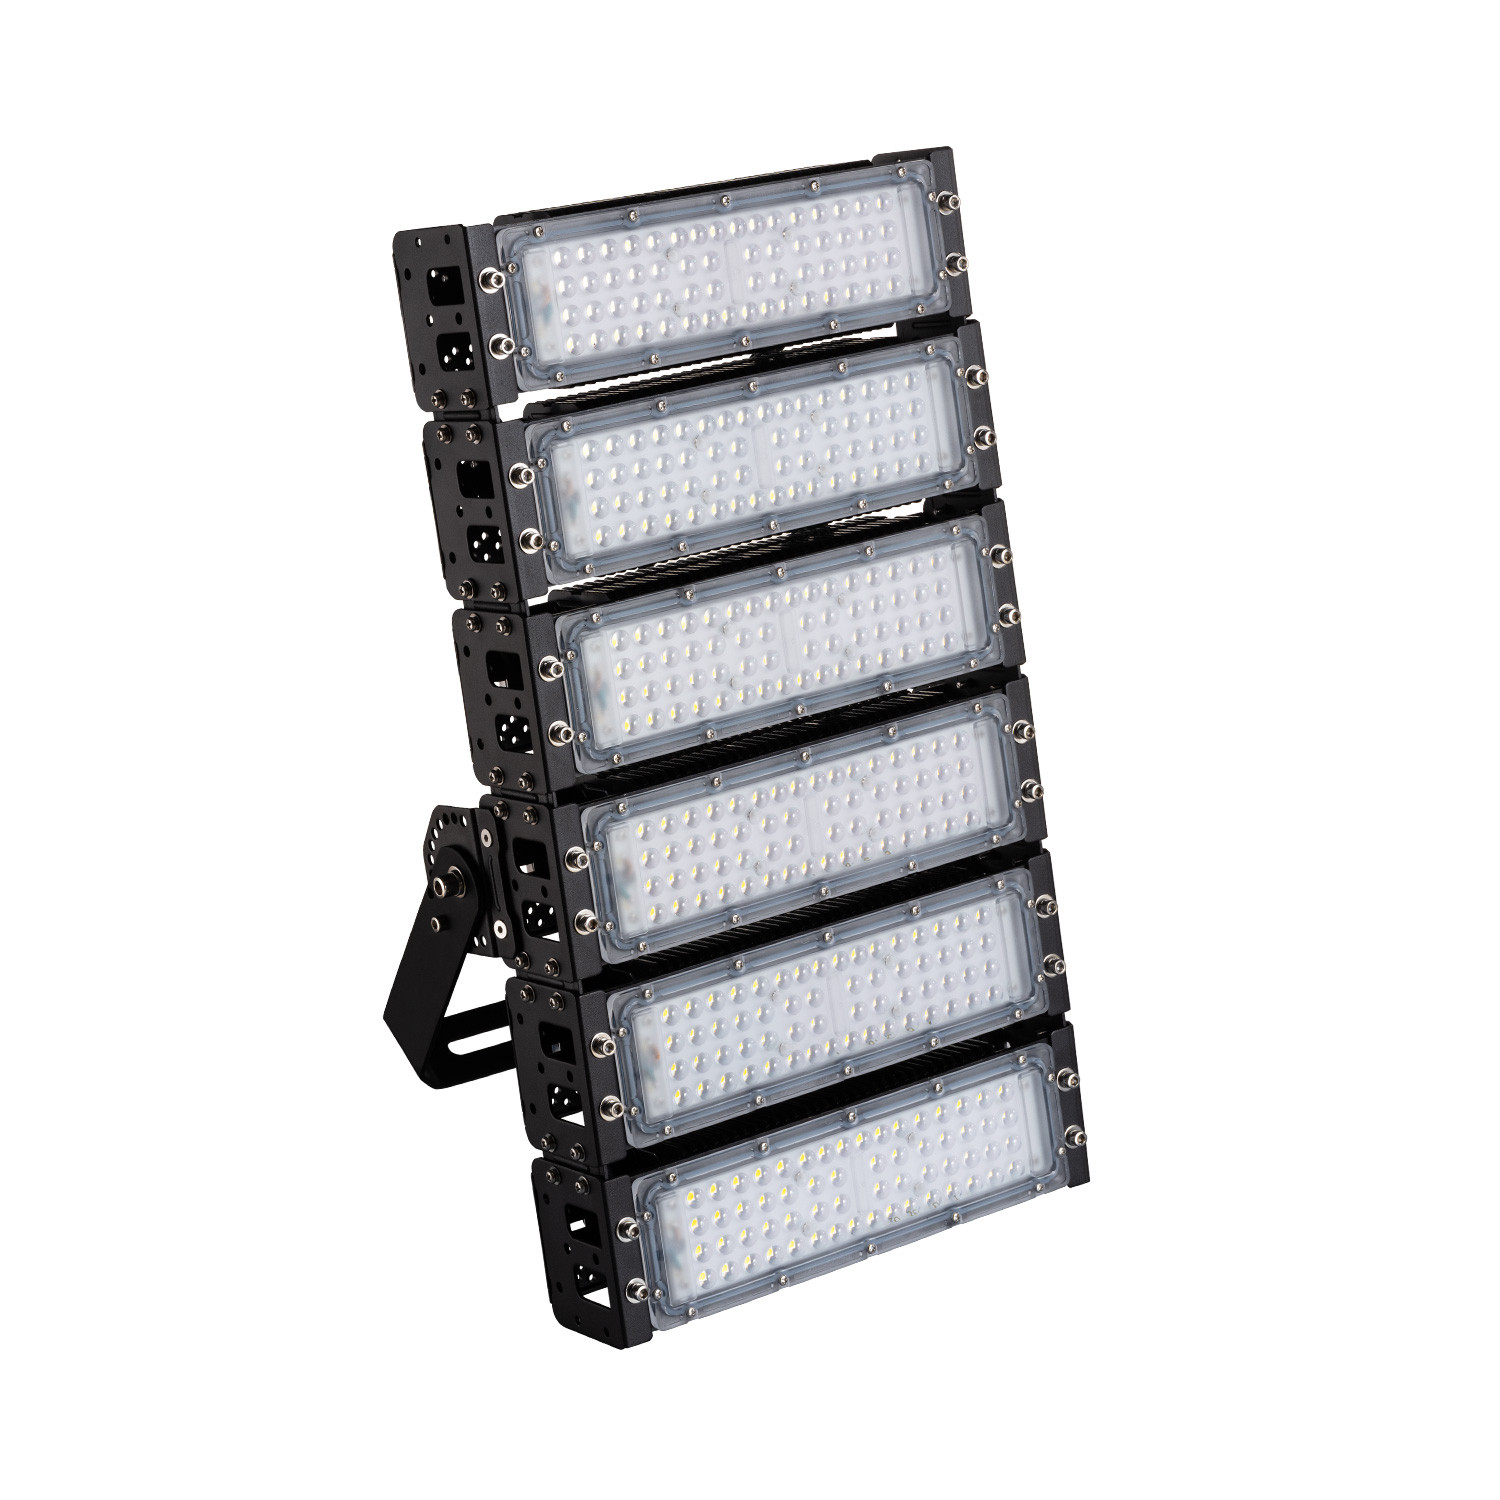 300W LED Floodlight Modular Outdoor Project Spotlight Cool White Wall Lamp UK 